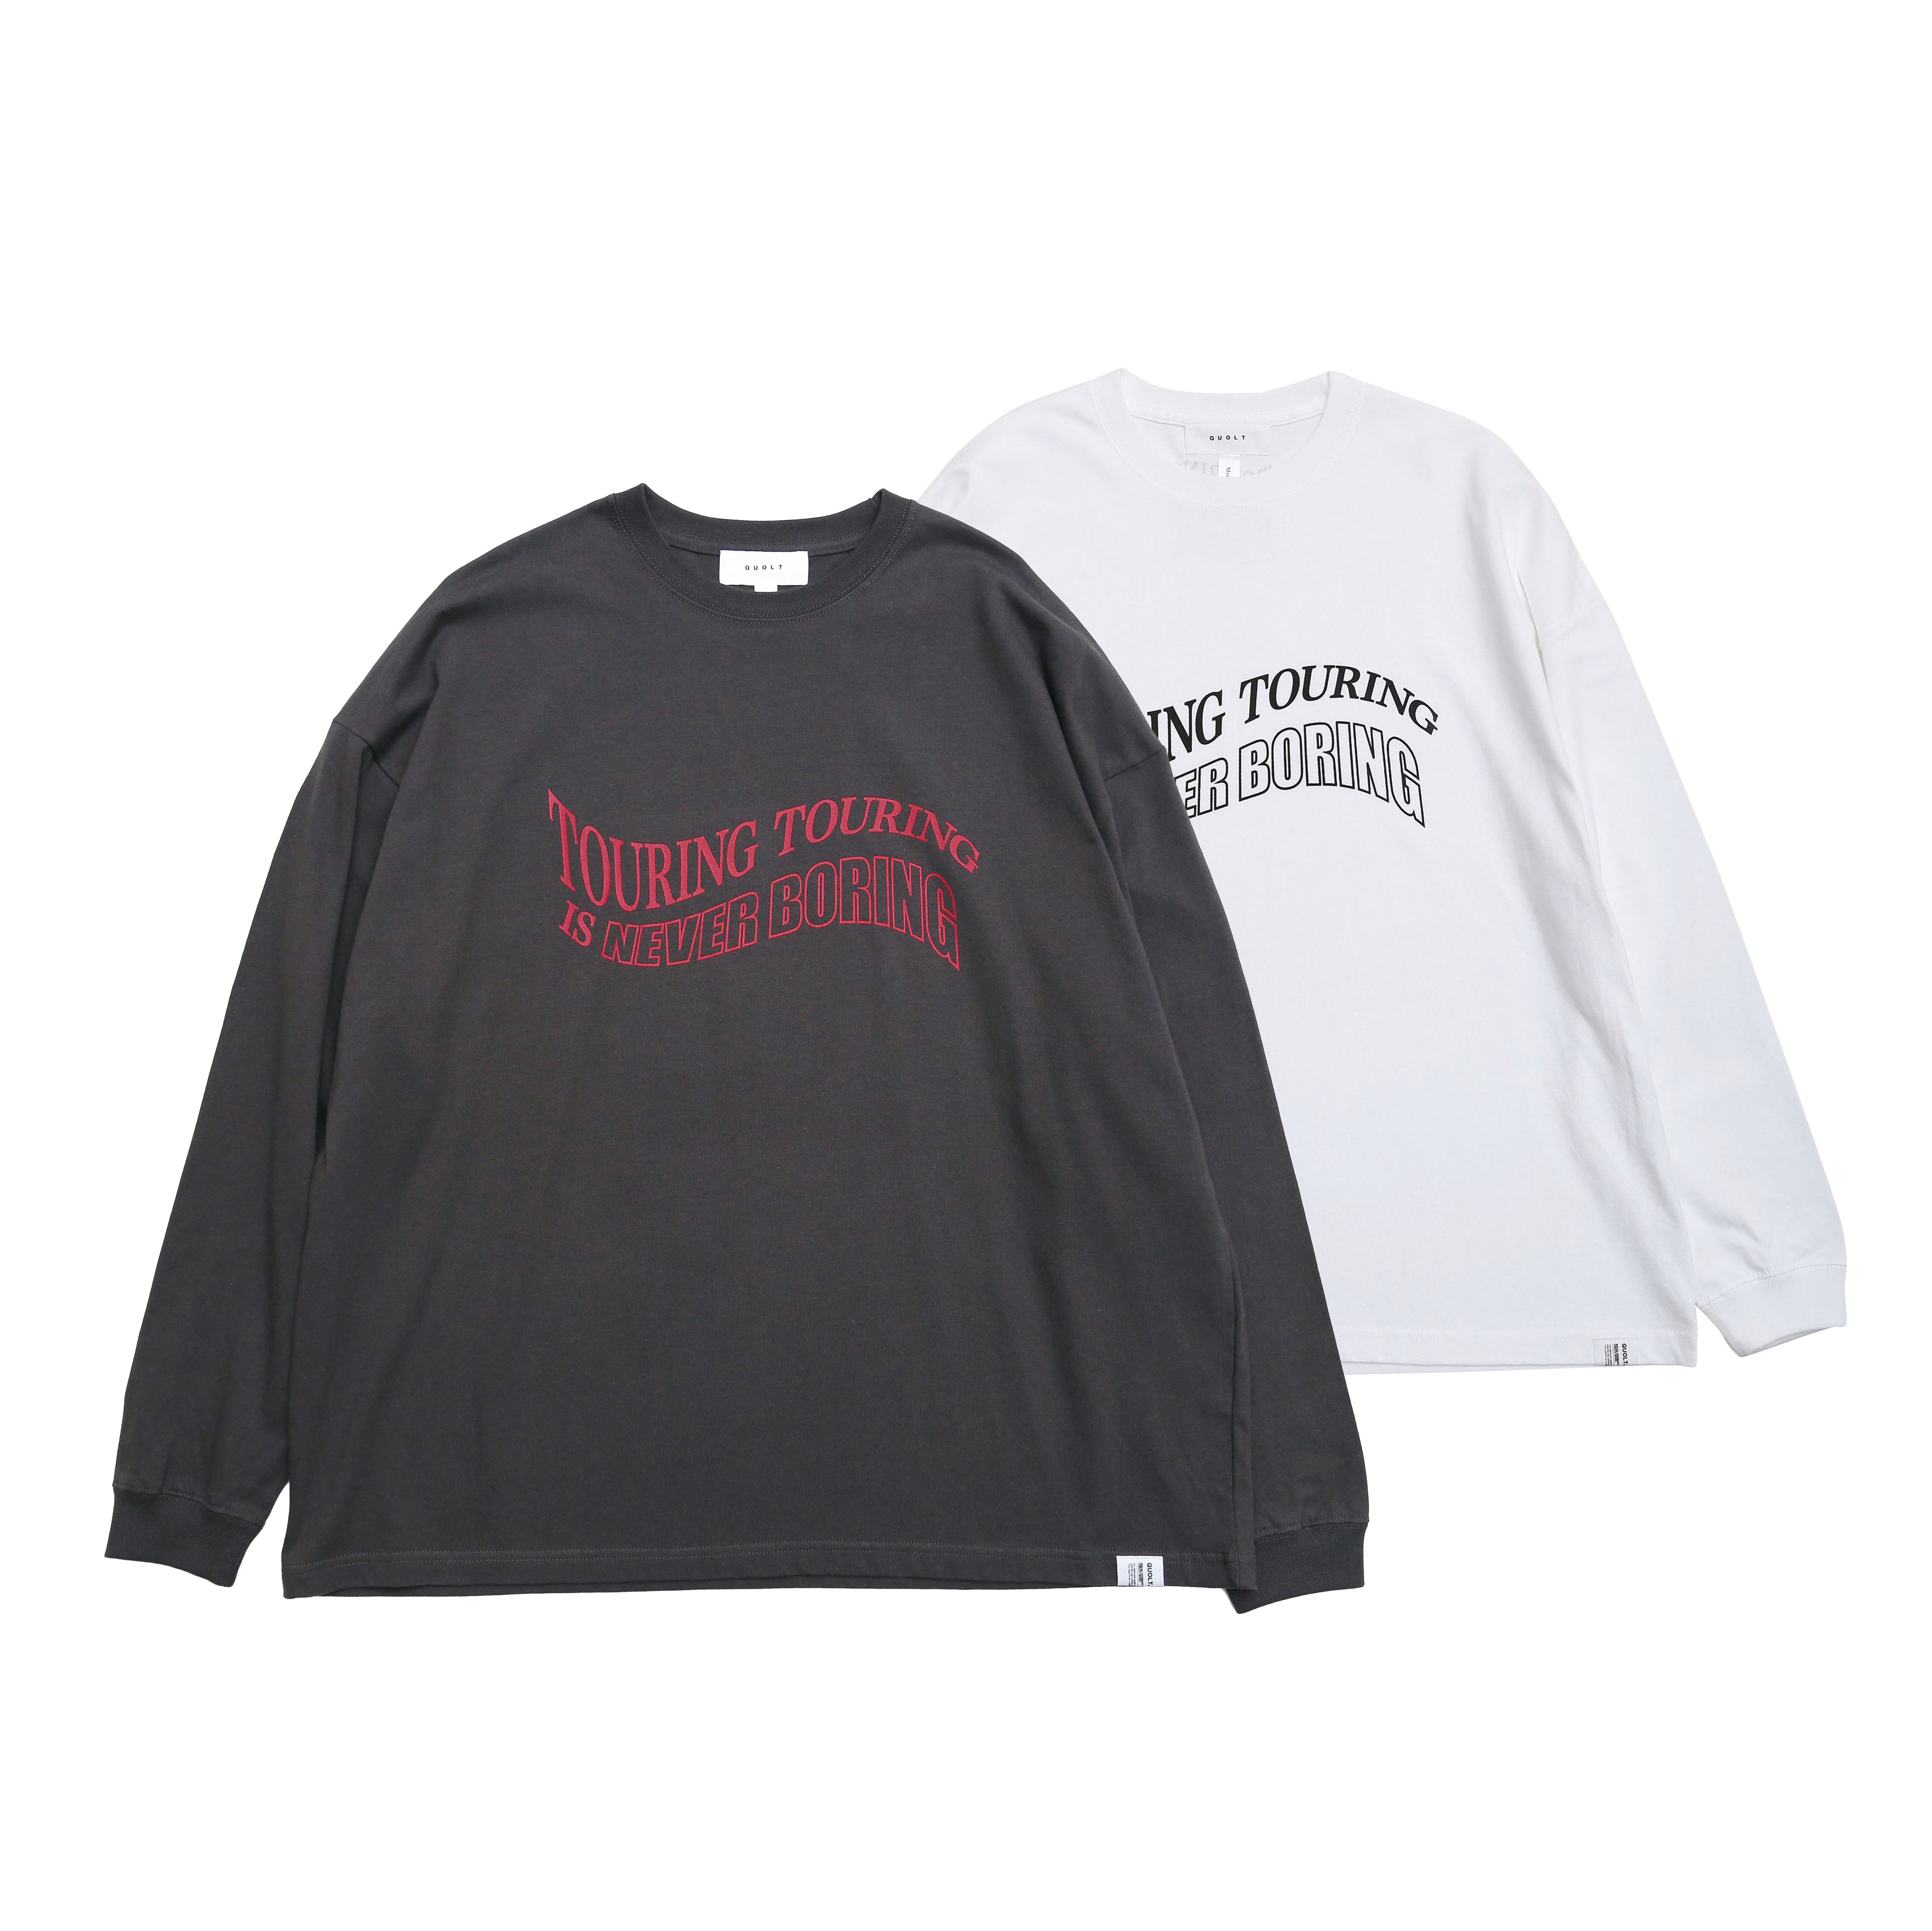 No:901T-1700 | Name:TOURING TEE  | Color:Sumi-Kuro/White  |【QUOLT_クオルト】【ネコポス選択可能】